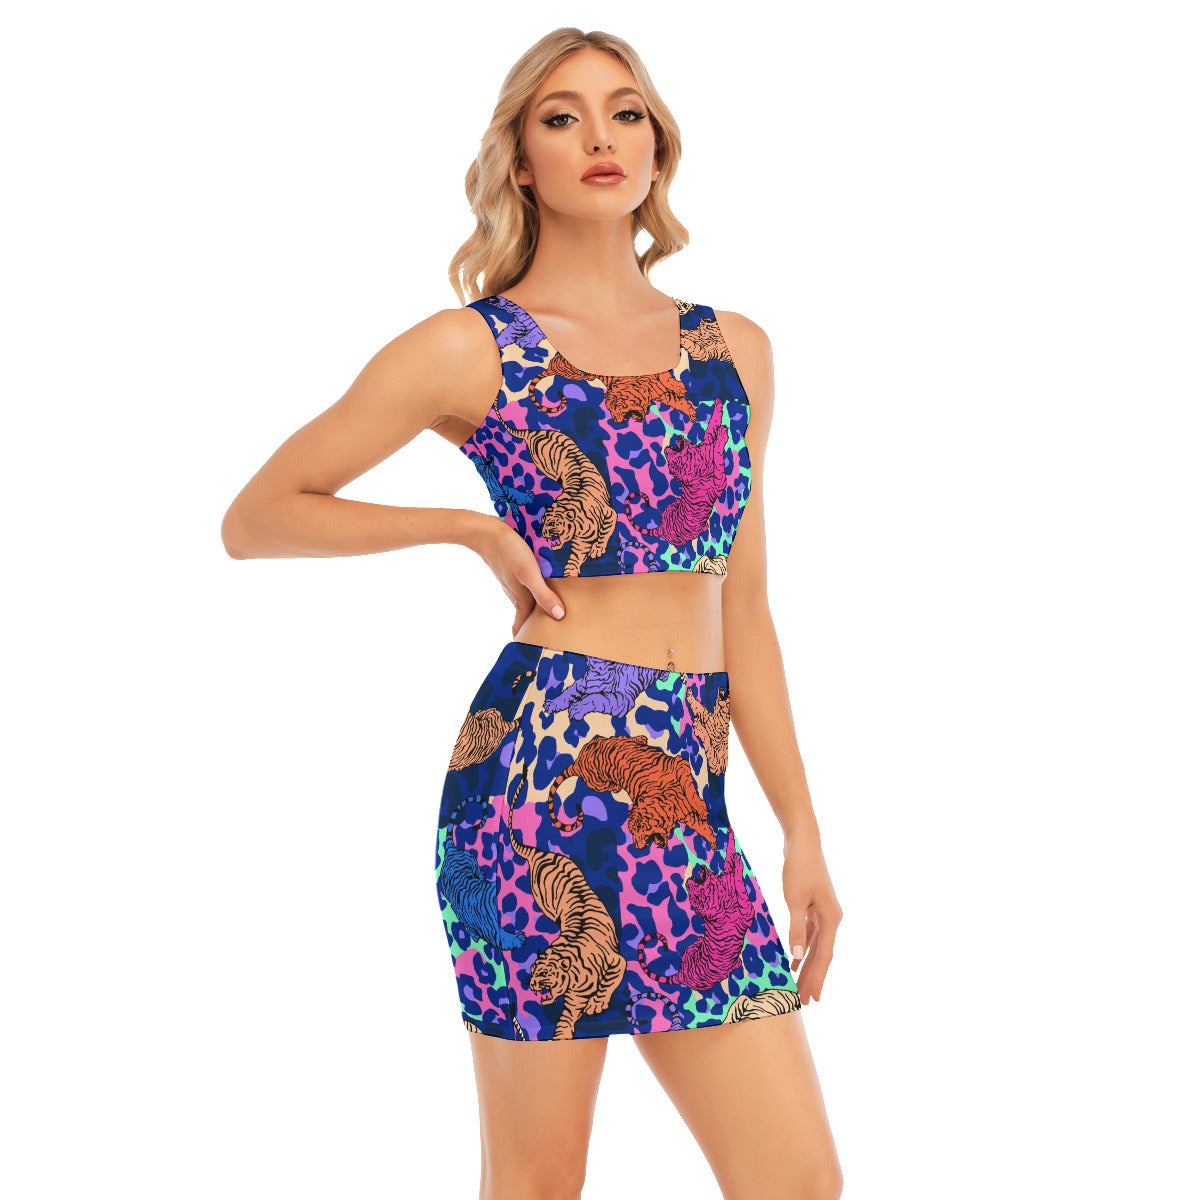 Tigers In Leopard Matching Two-Piece Set in Neon